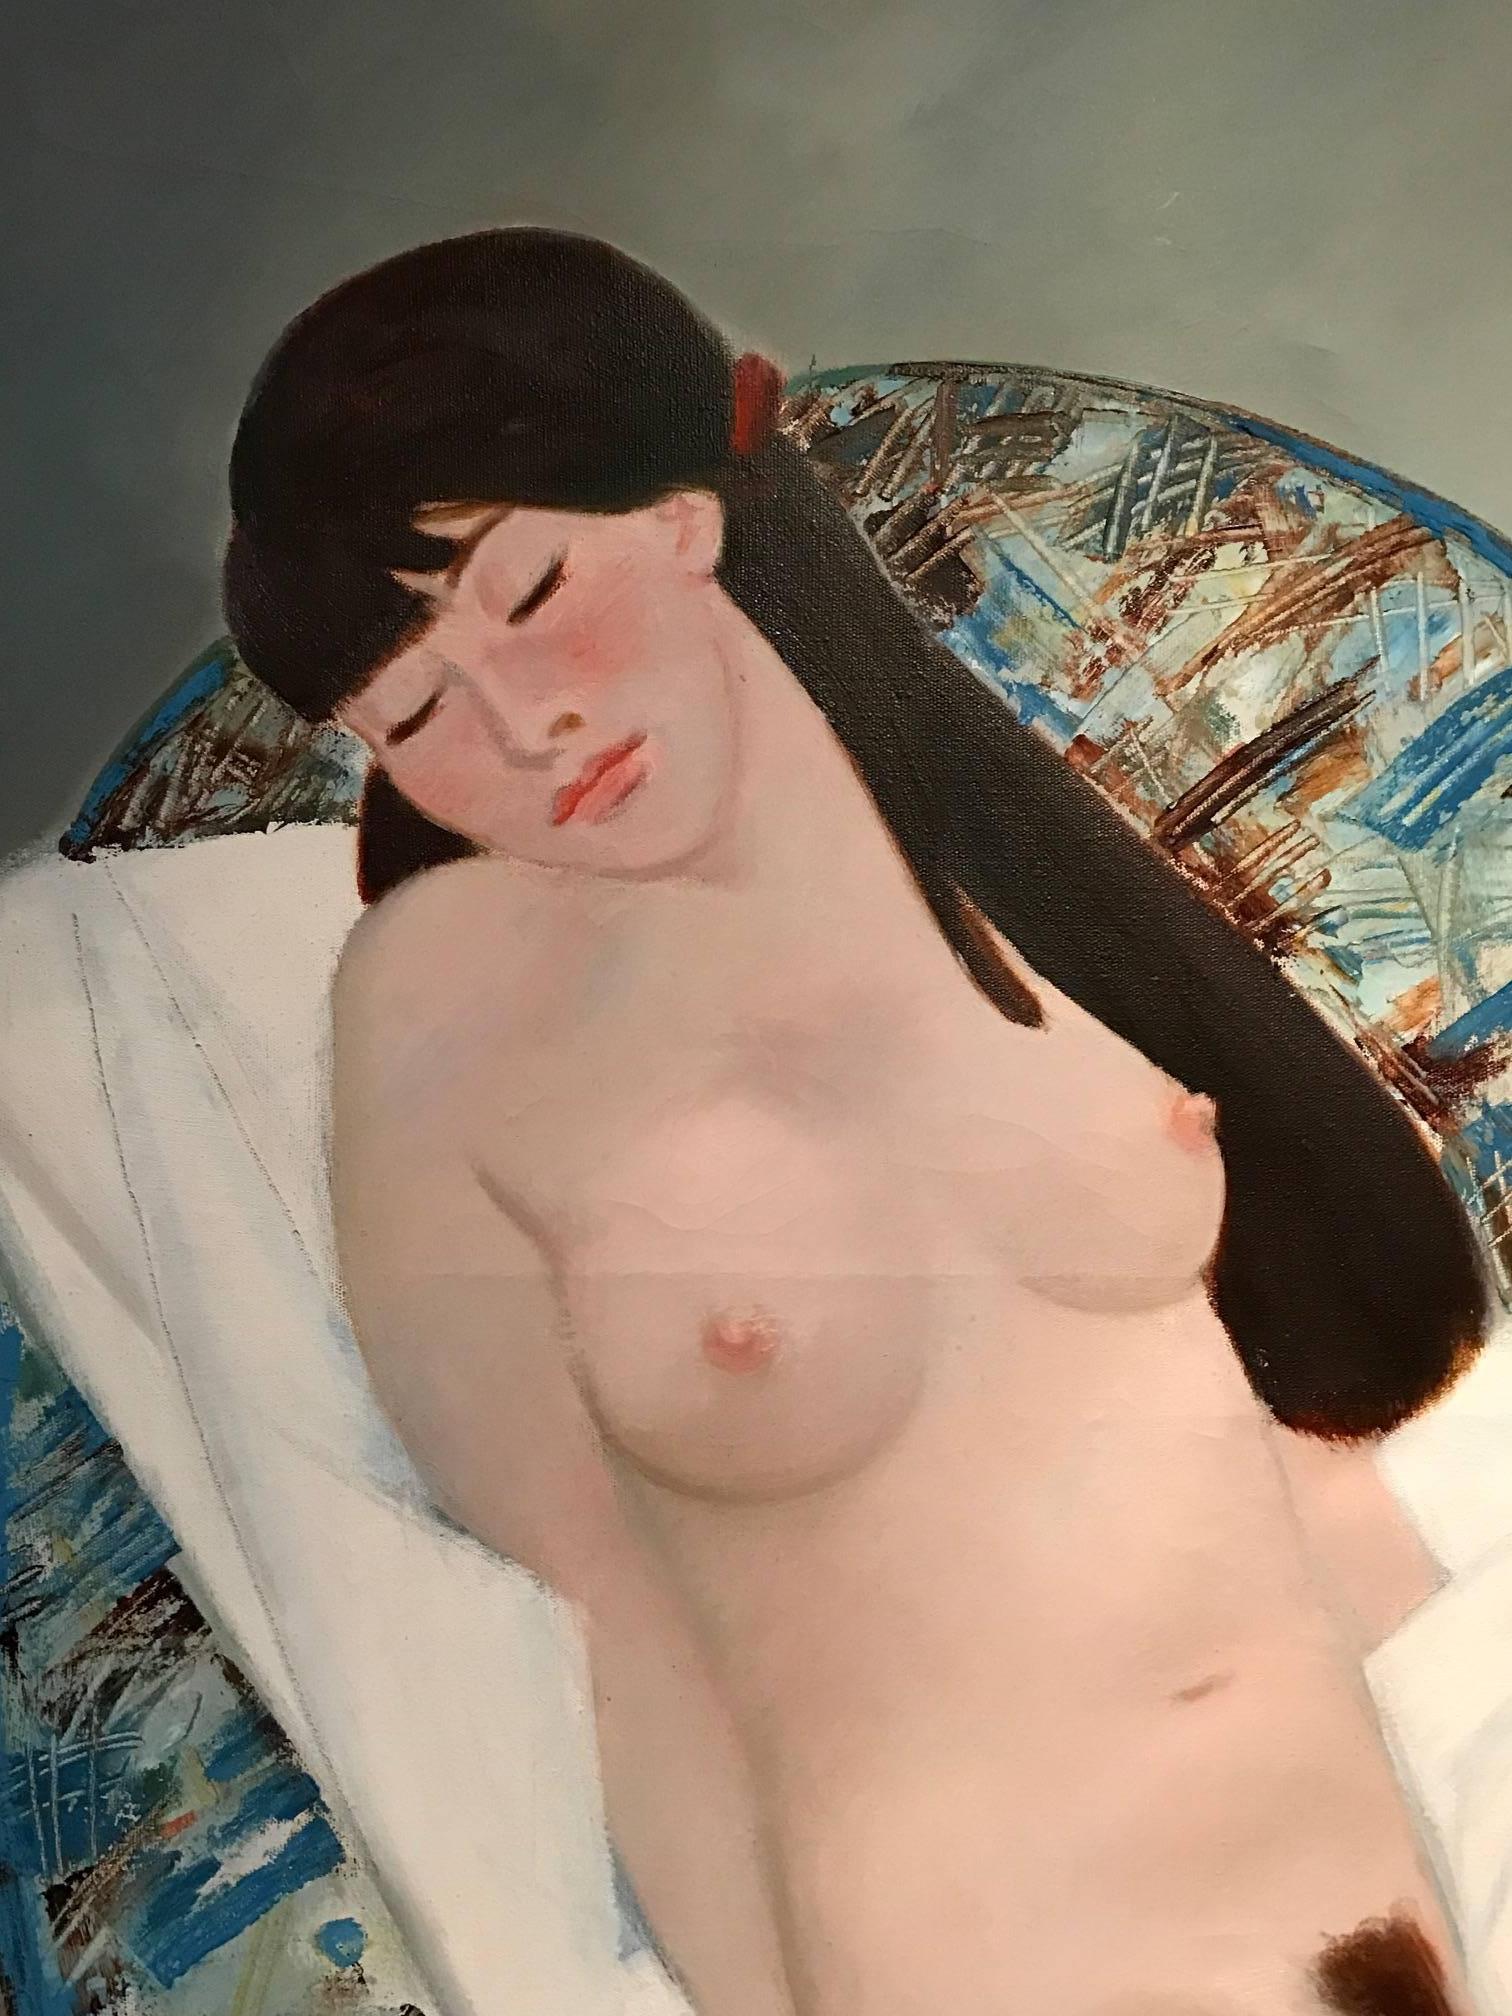 Superb large scale 20th century Russian oil painting by the listed artist Sergei Dmitrievich Kichko (born 1946). The work is signed with the artists initials to the lower left corner and dated 98. 

The painting beautifully depicts this nude woman